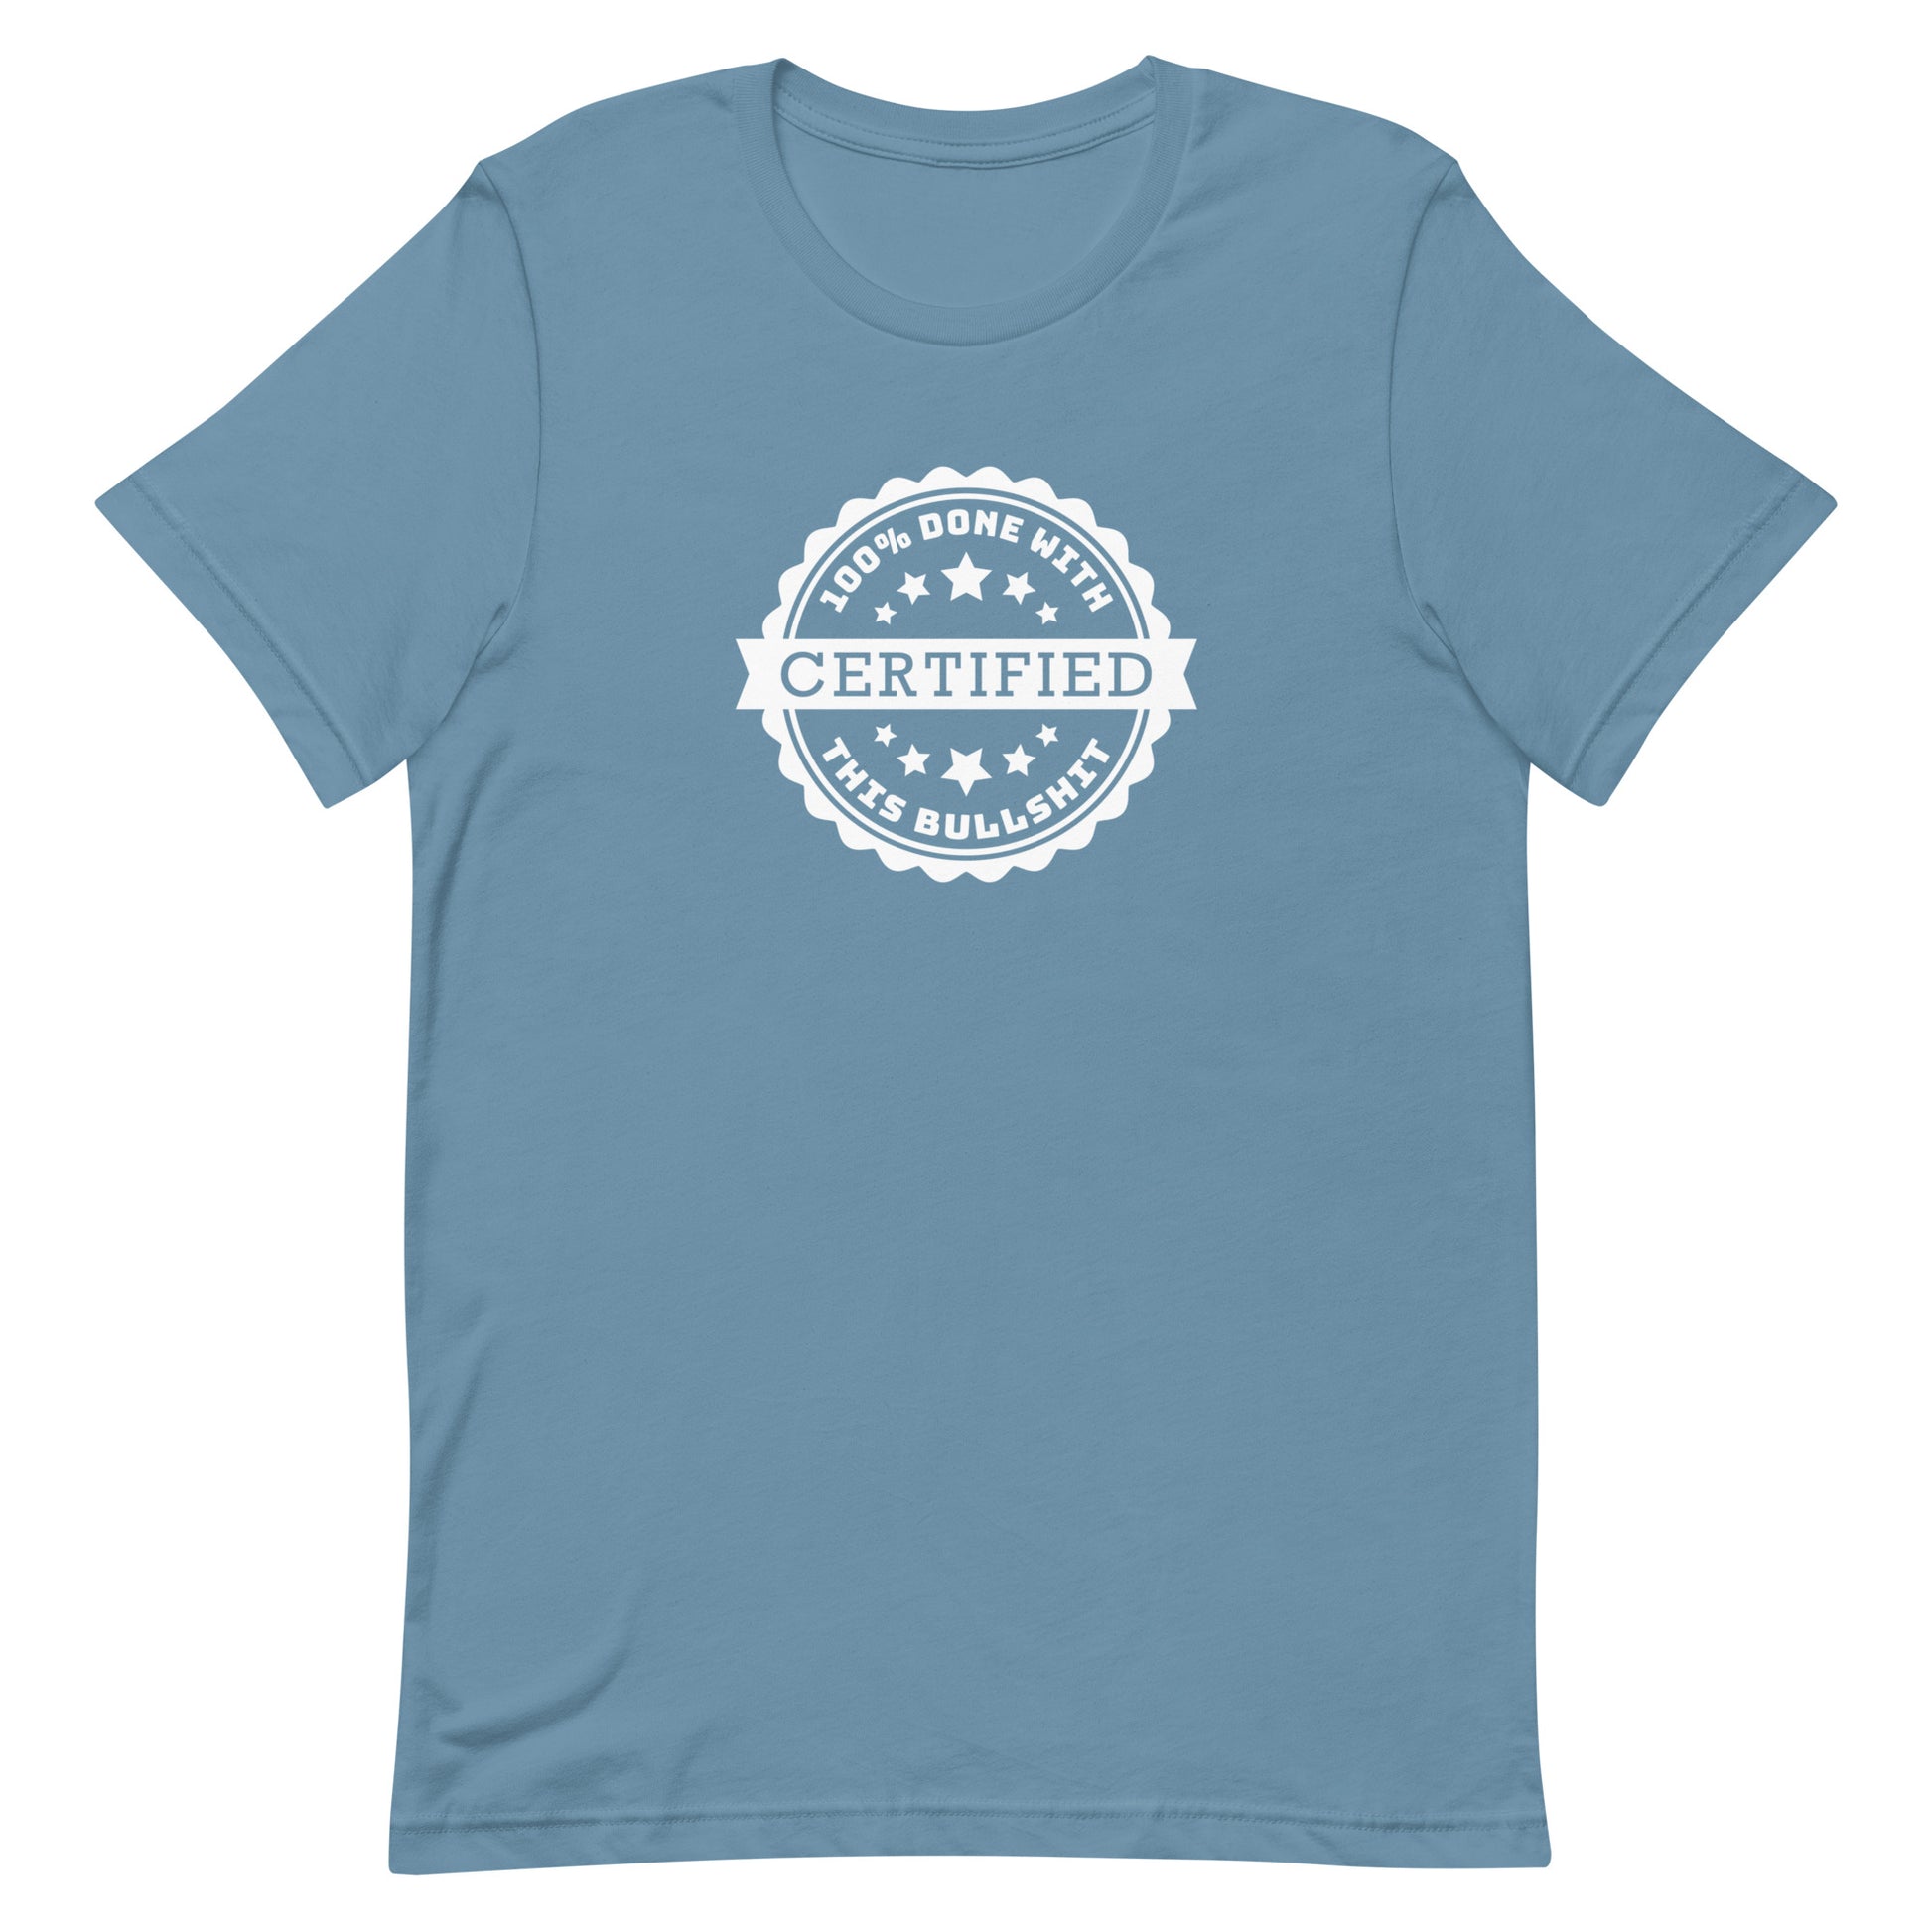 A blue crewneck t-shirt featuring an official-looking seal which reads "CERTIFIED 100% done with this bullshit"